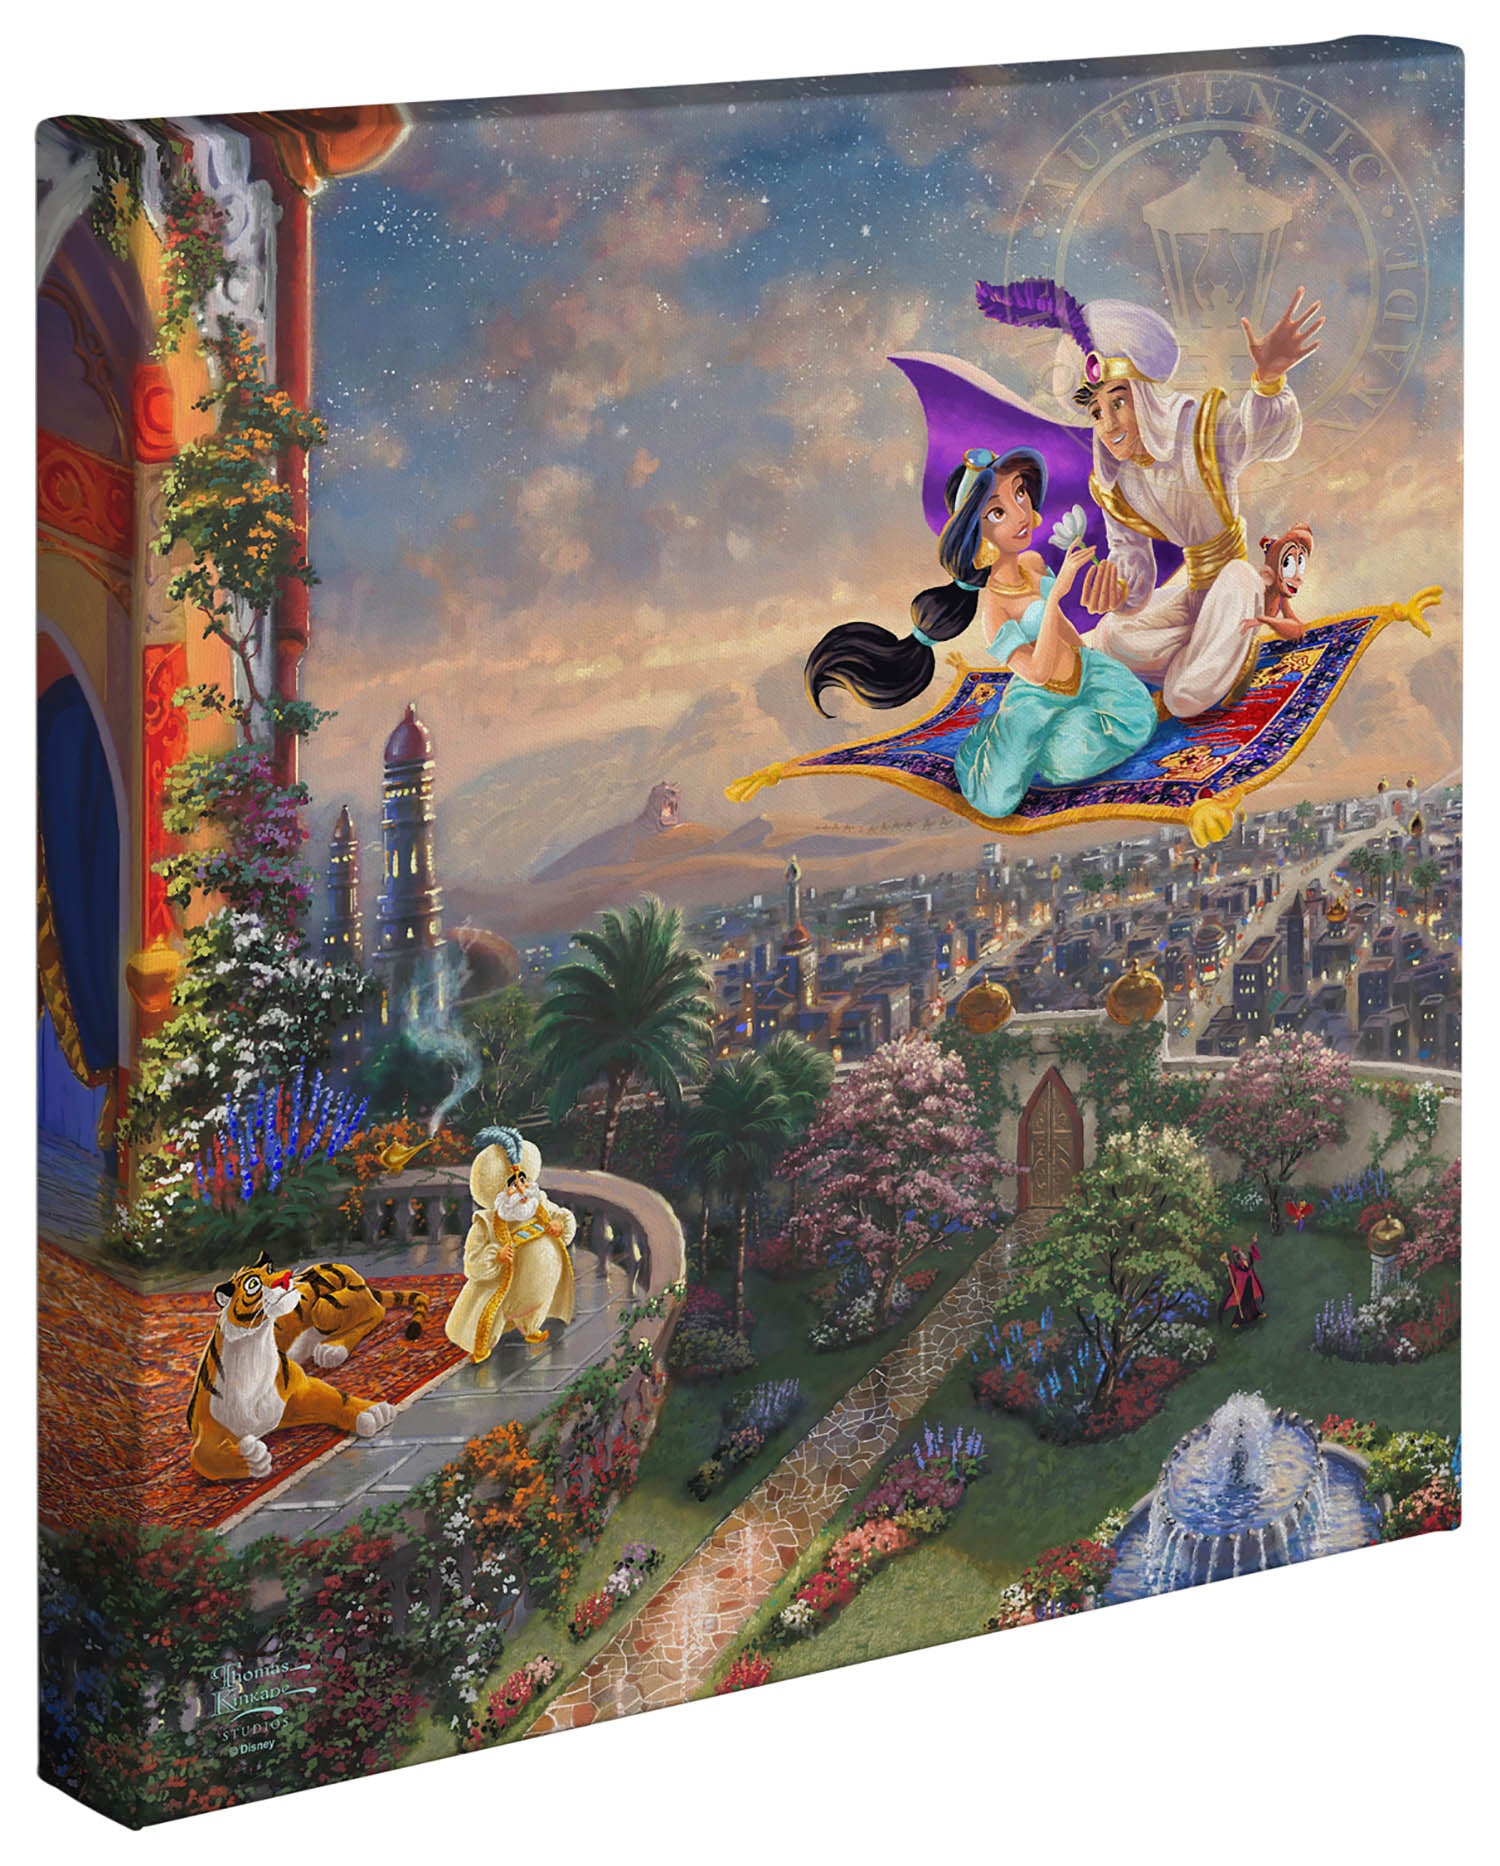 Thomas Kinkade 14 x 14 Gallery Wrapped Canvas Beauty and The Beast